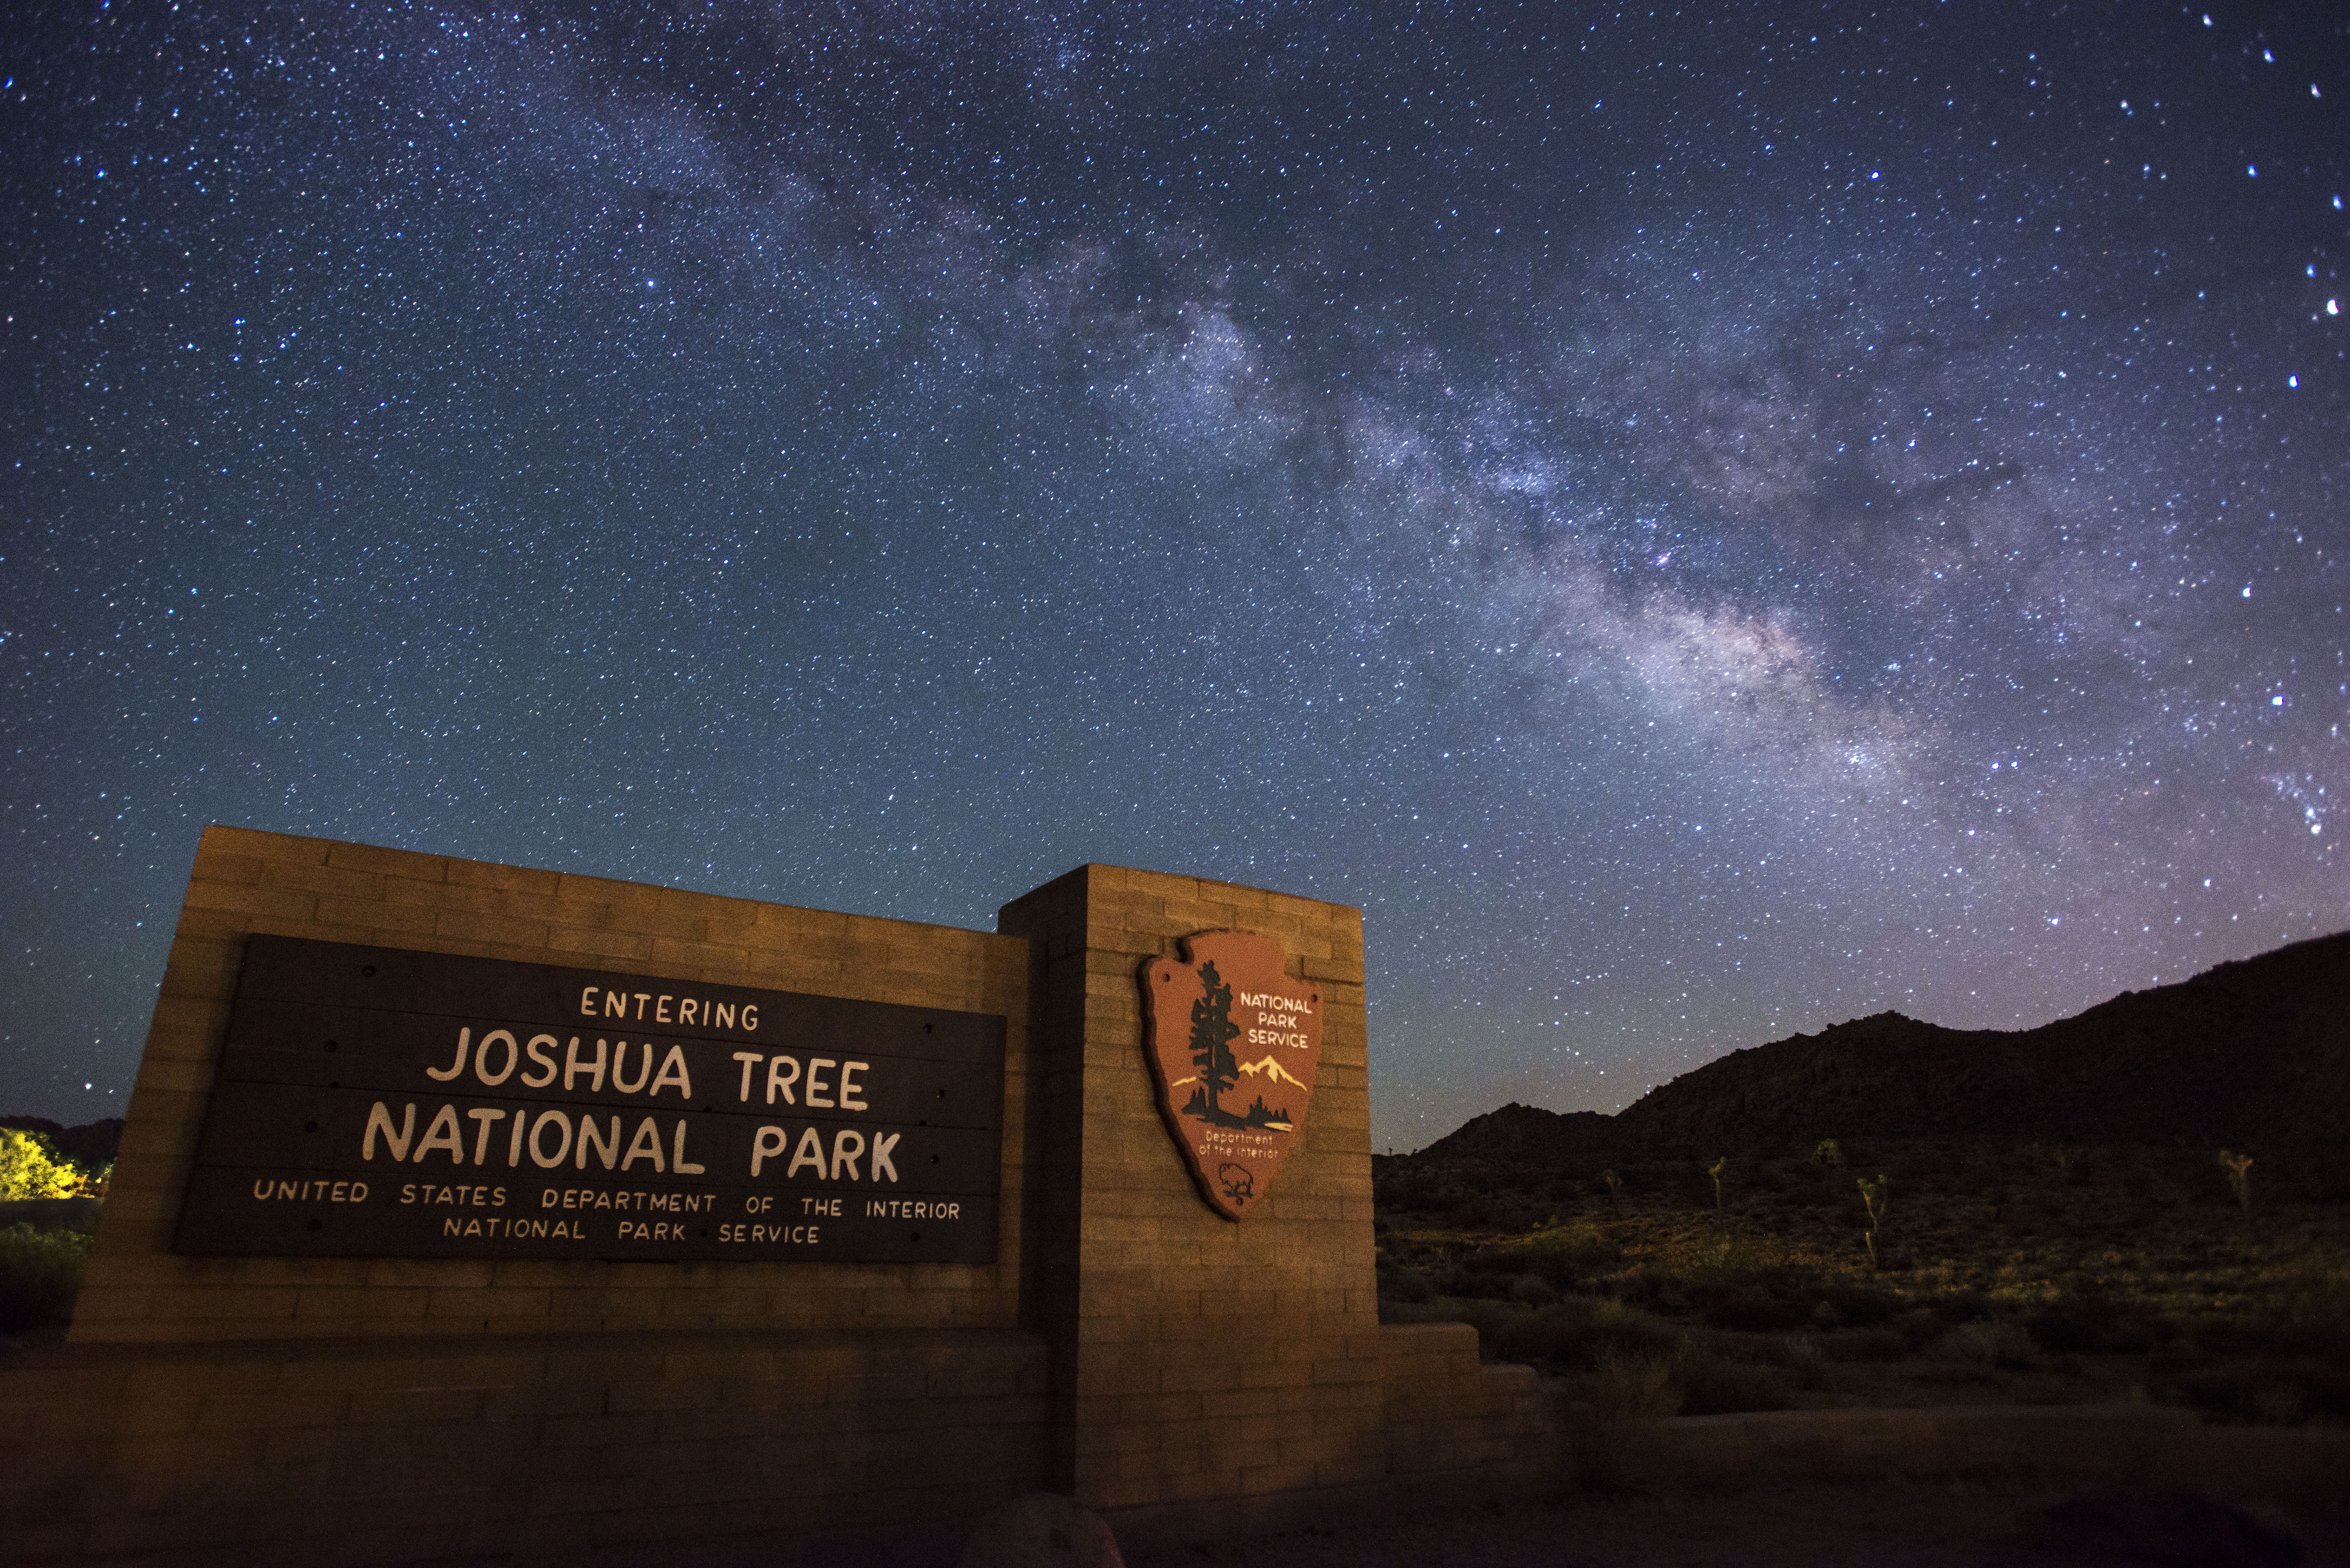 night scene showing stars of the Milky Way over a sign saying "Entering Joshua Tree National Park"